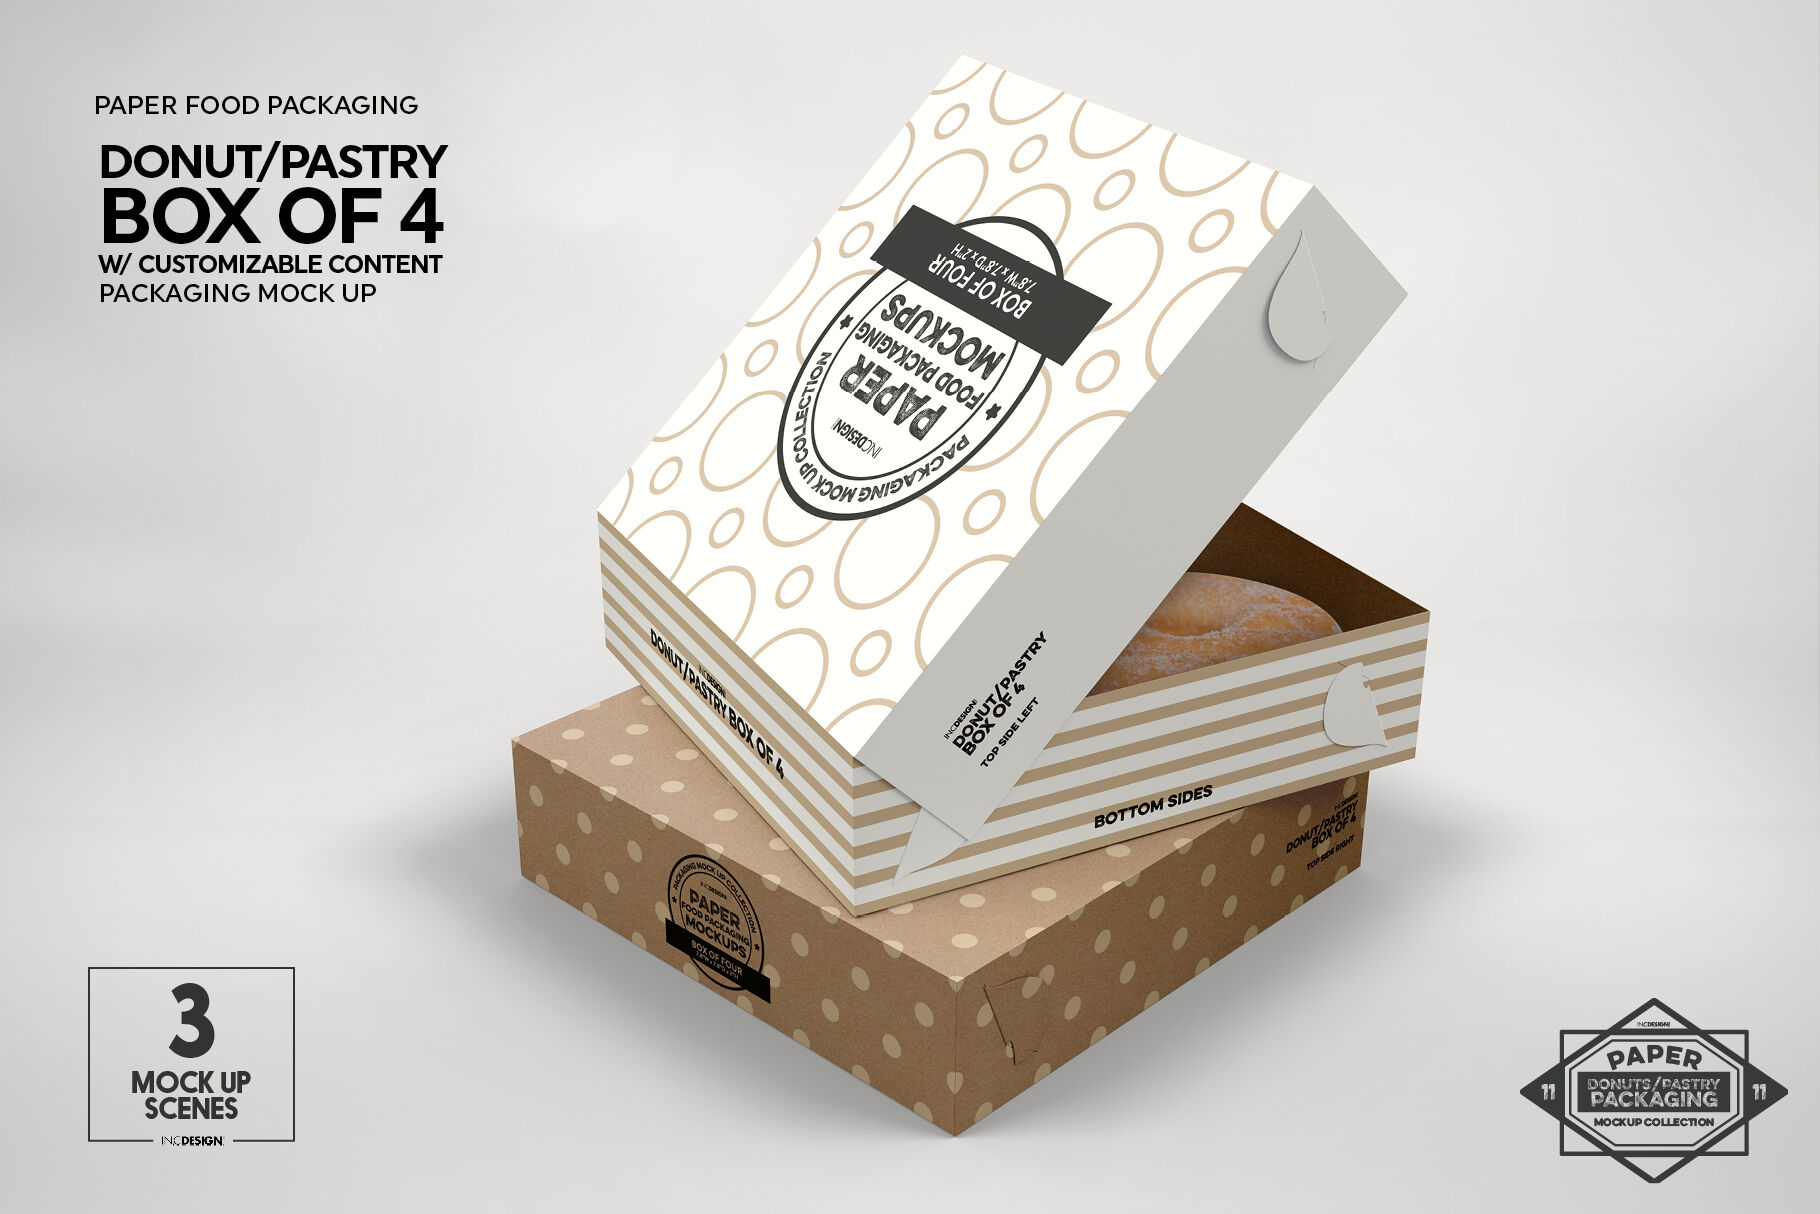 Design Mexican Food Packaging Mockup Free : Free Food Box Branding Mockup PSD | Free Mockup ...